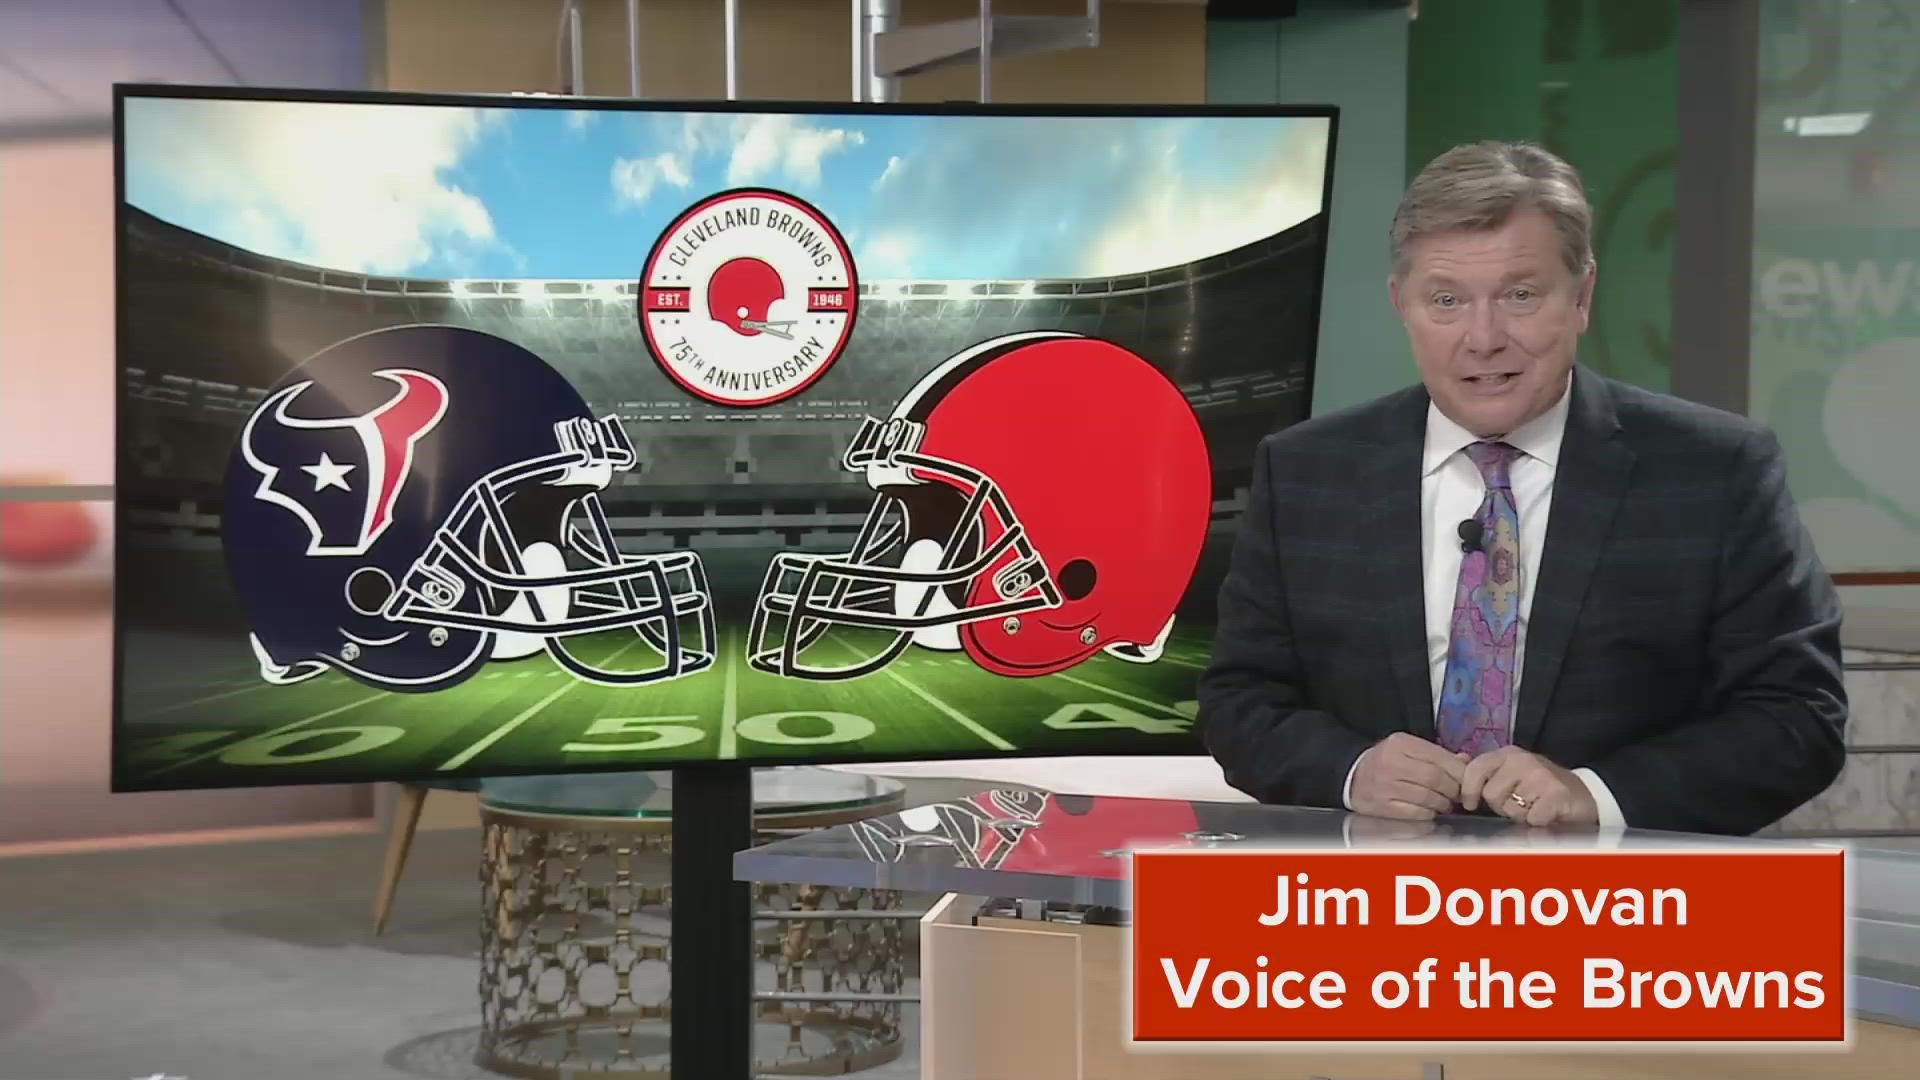 Jim Donovan has the keys of the game for this week's Browns game.